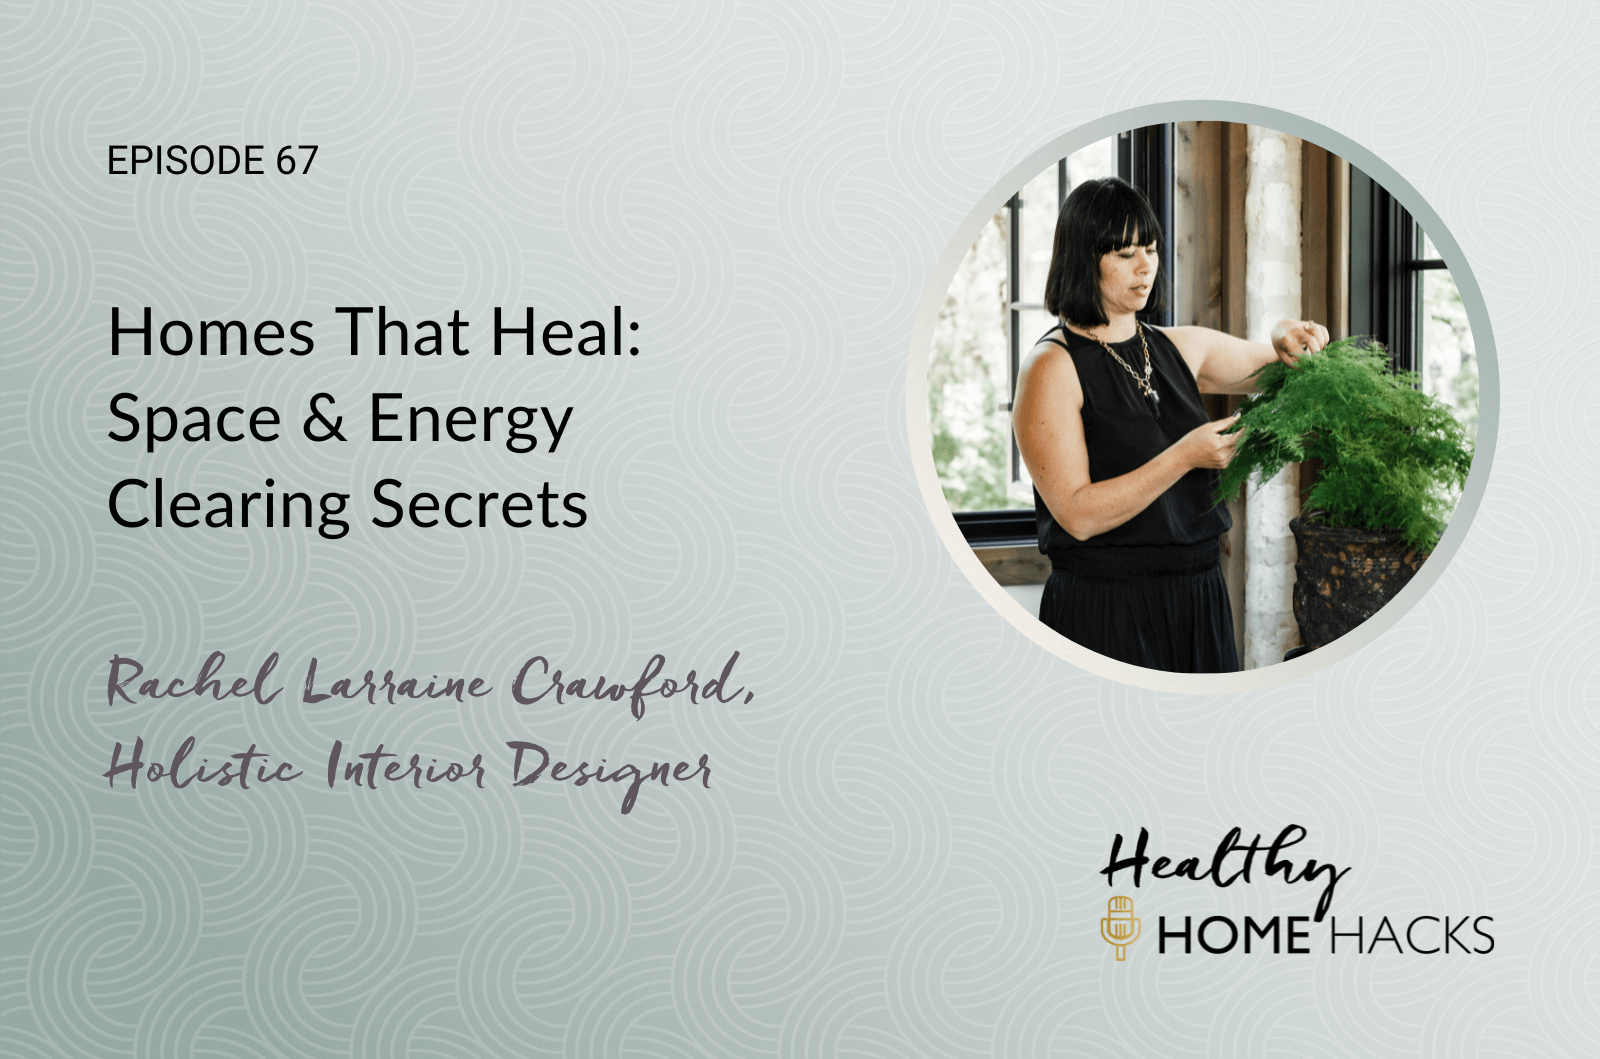 Homes That Heal: Space & Energy Clearing Secrets